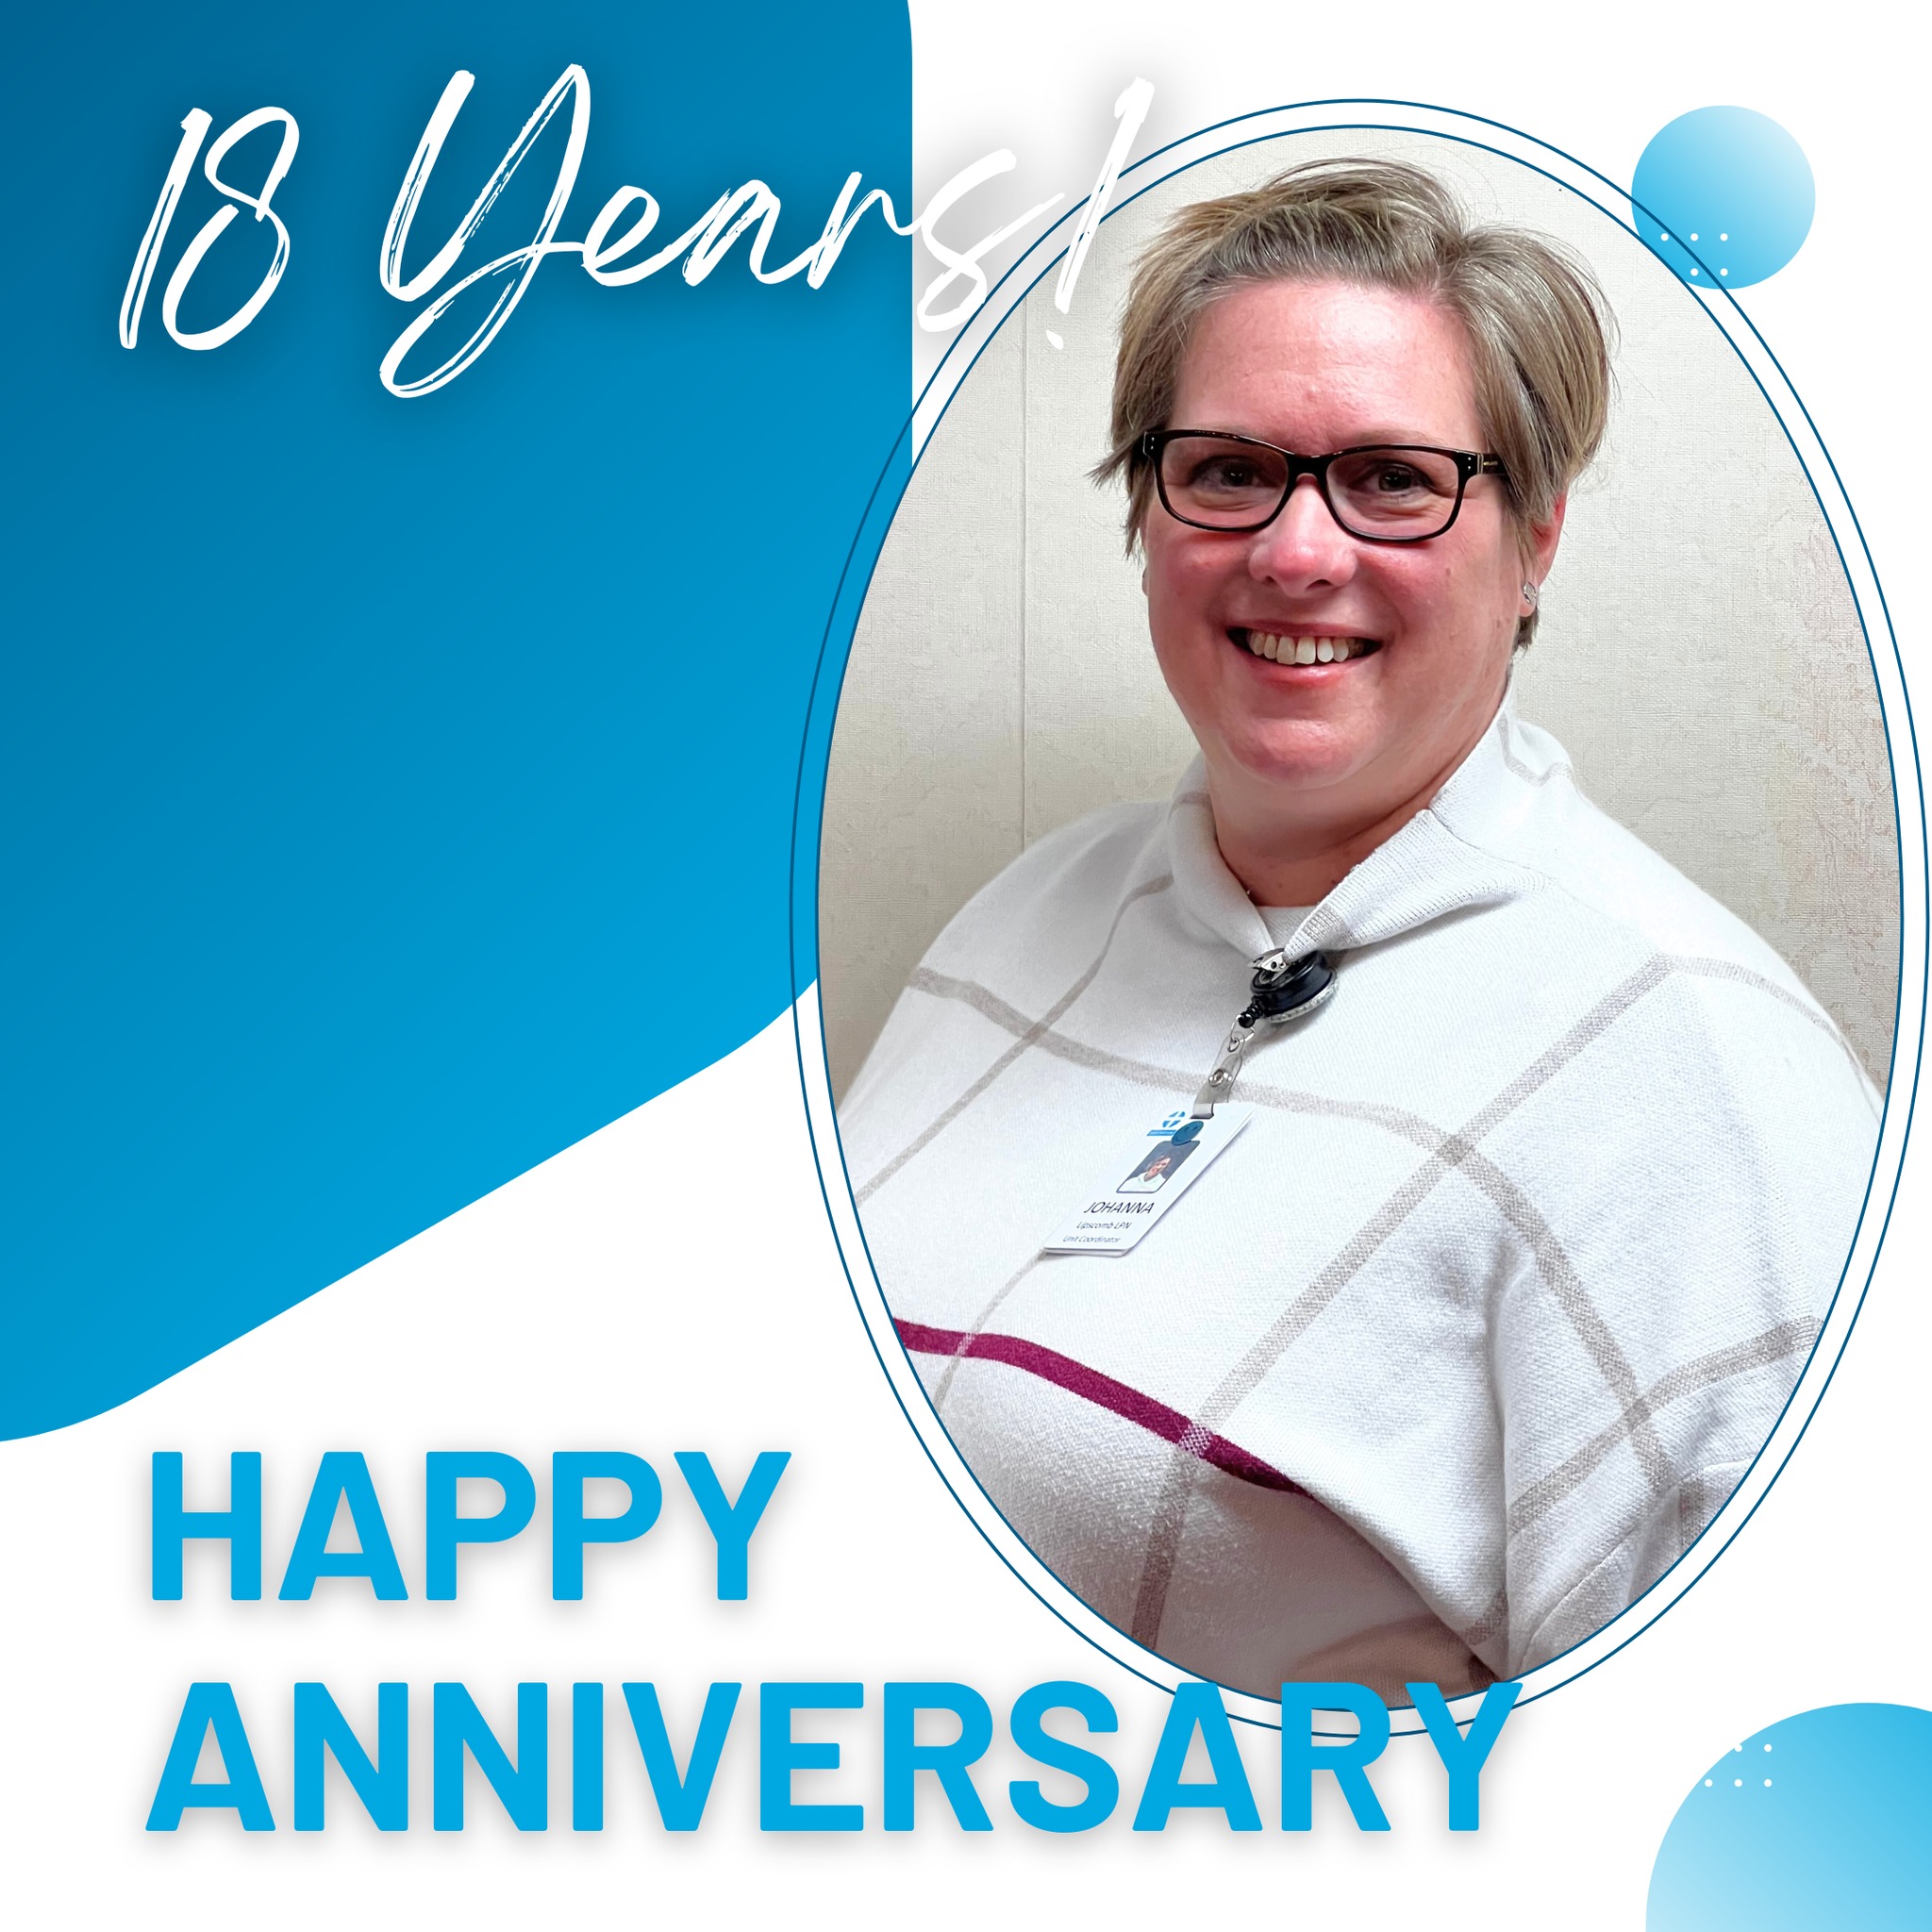 Today marks the 18th anniversary of Johanna Lipscomb, LPN and Unit Coordinator!🎉